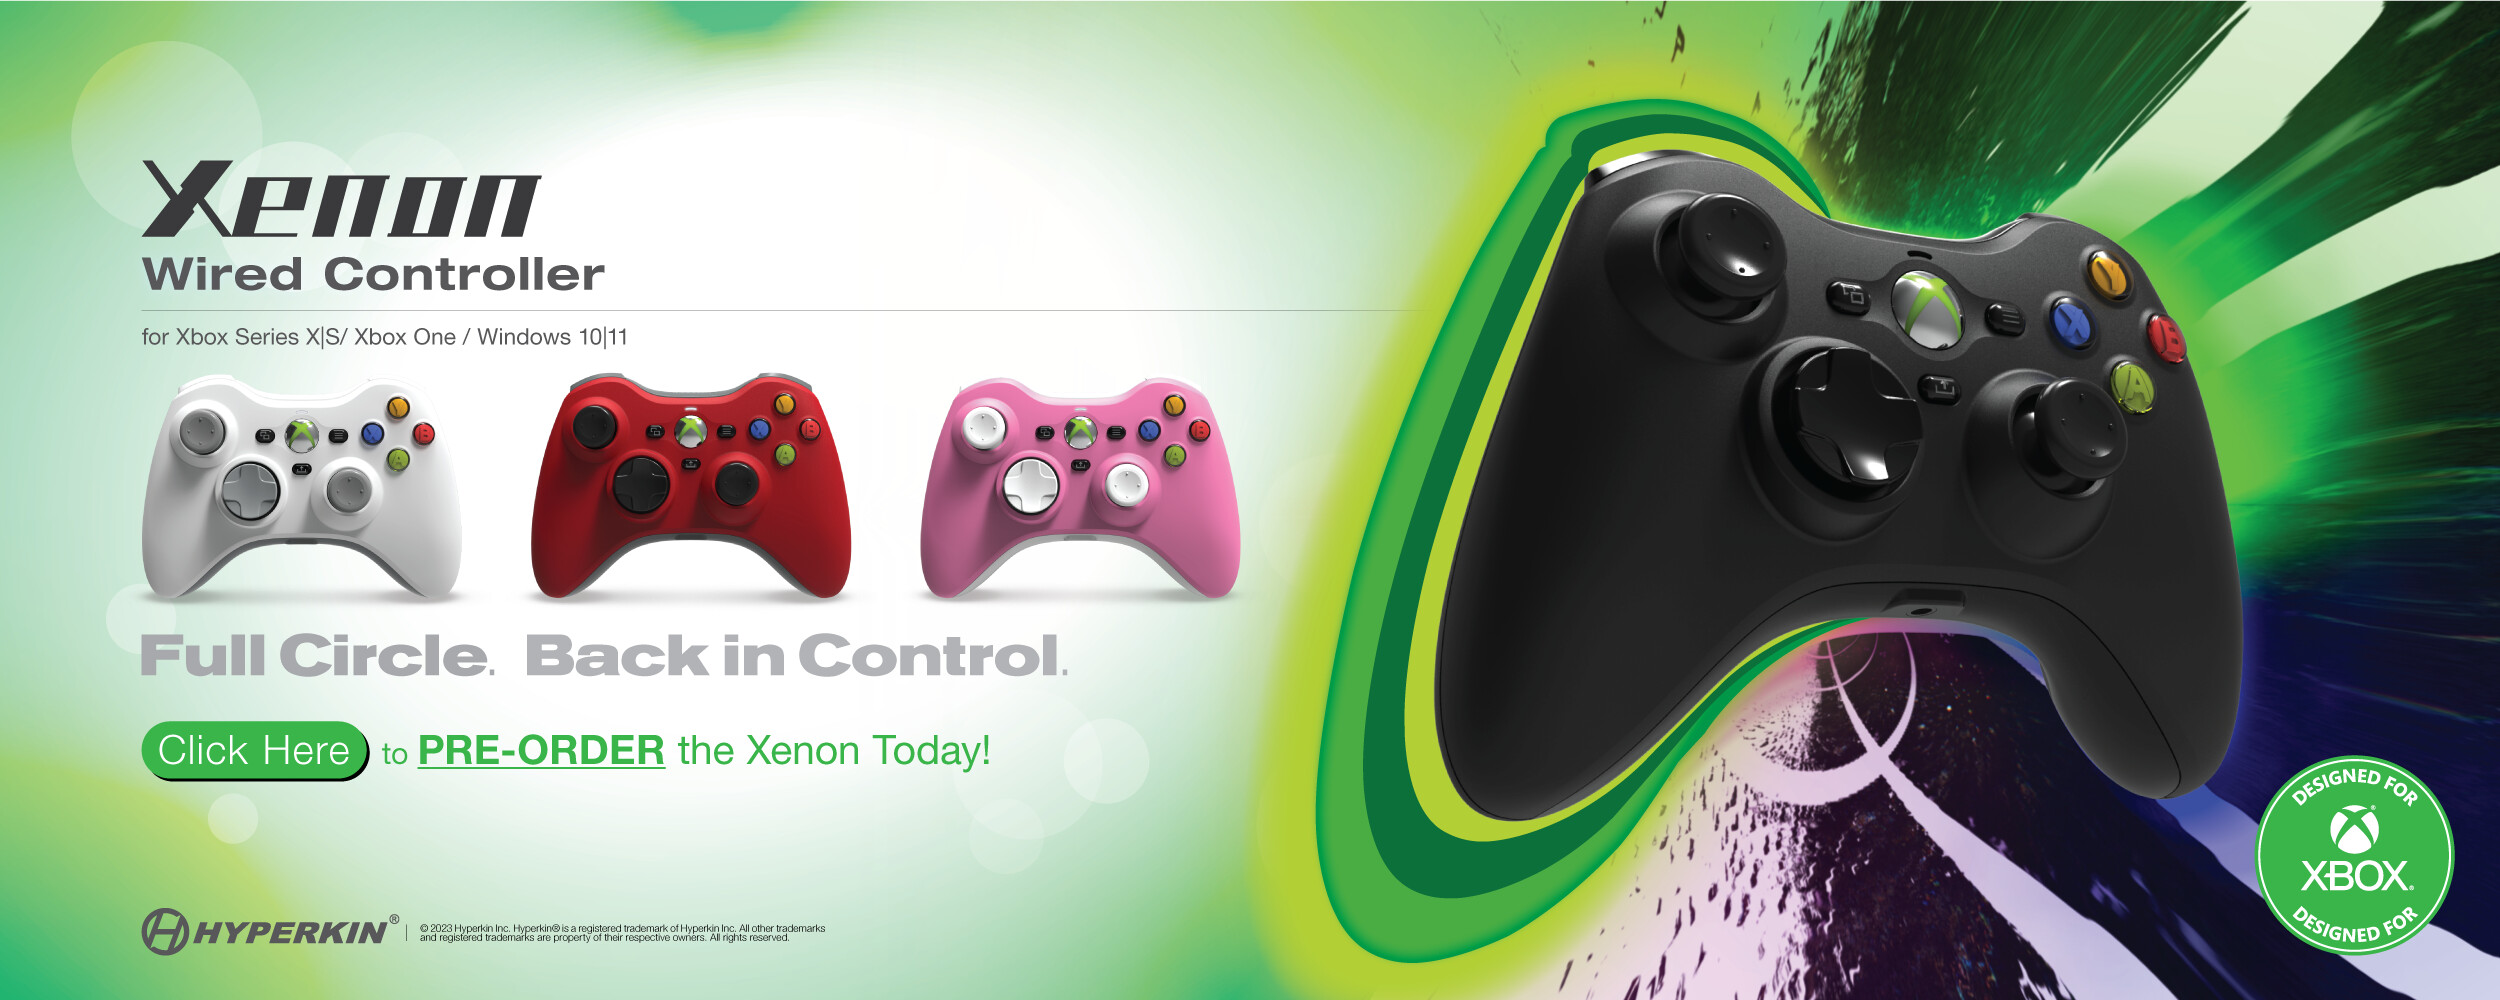 Hyperkin's Xenon Xbox 360-Style Wired Controller Available for Pre-Order